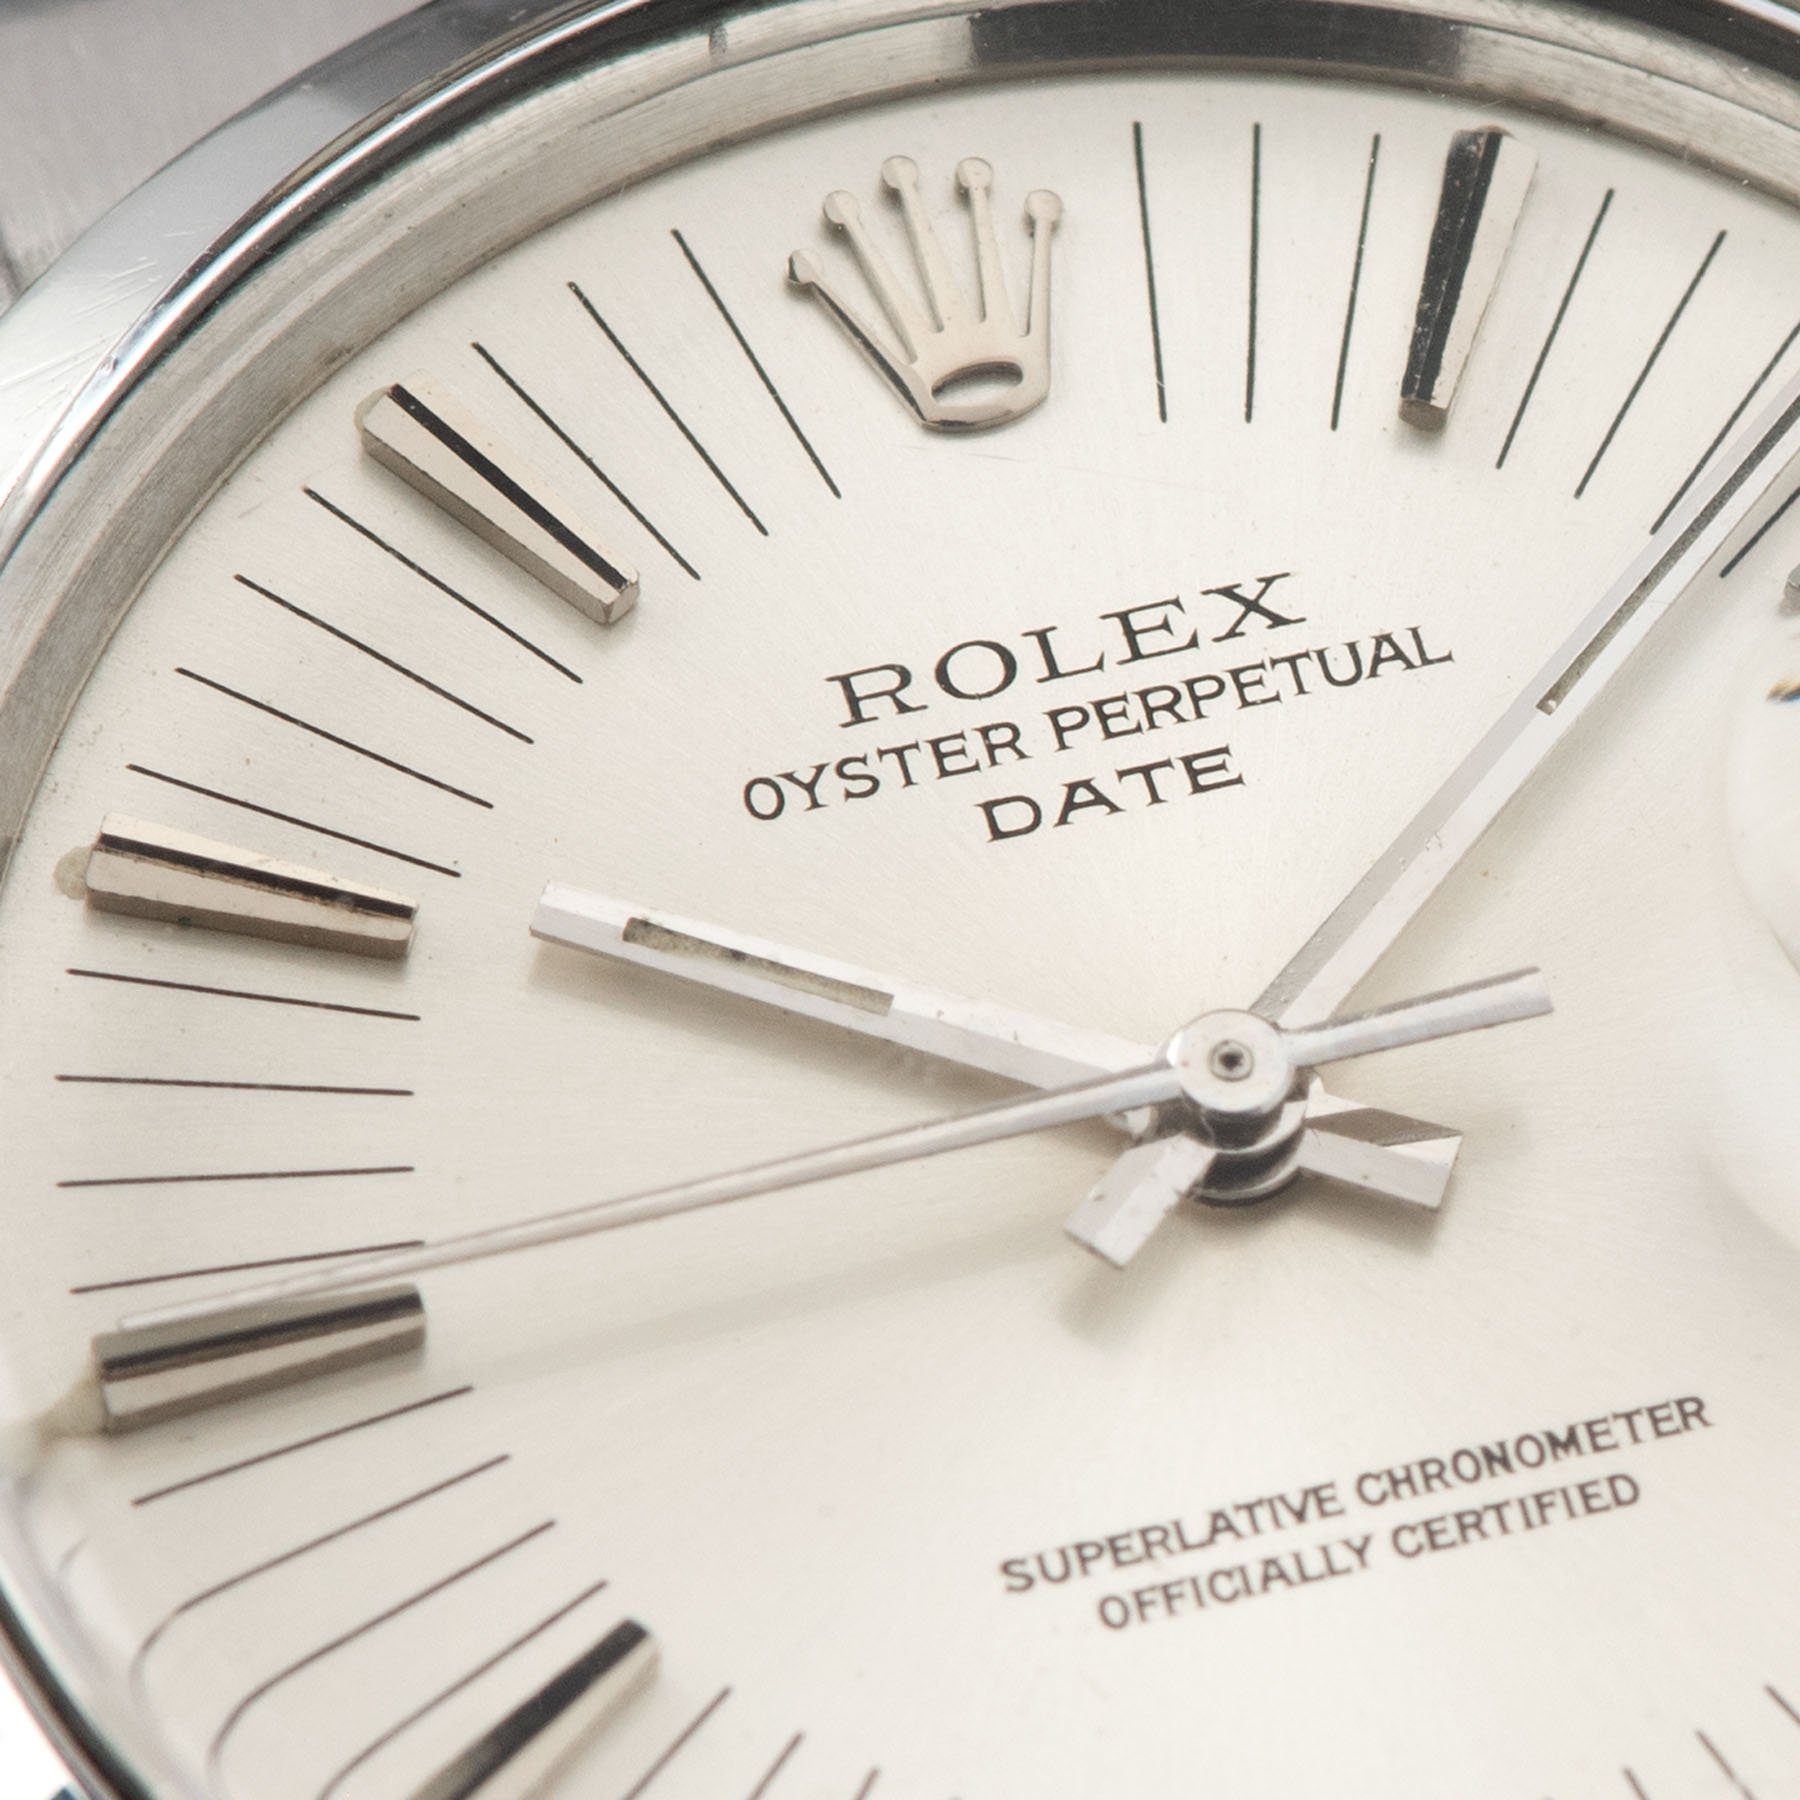 Rolex Oyster Perpetual Date Reference 1500